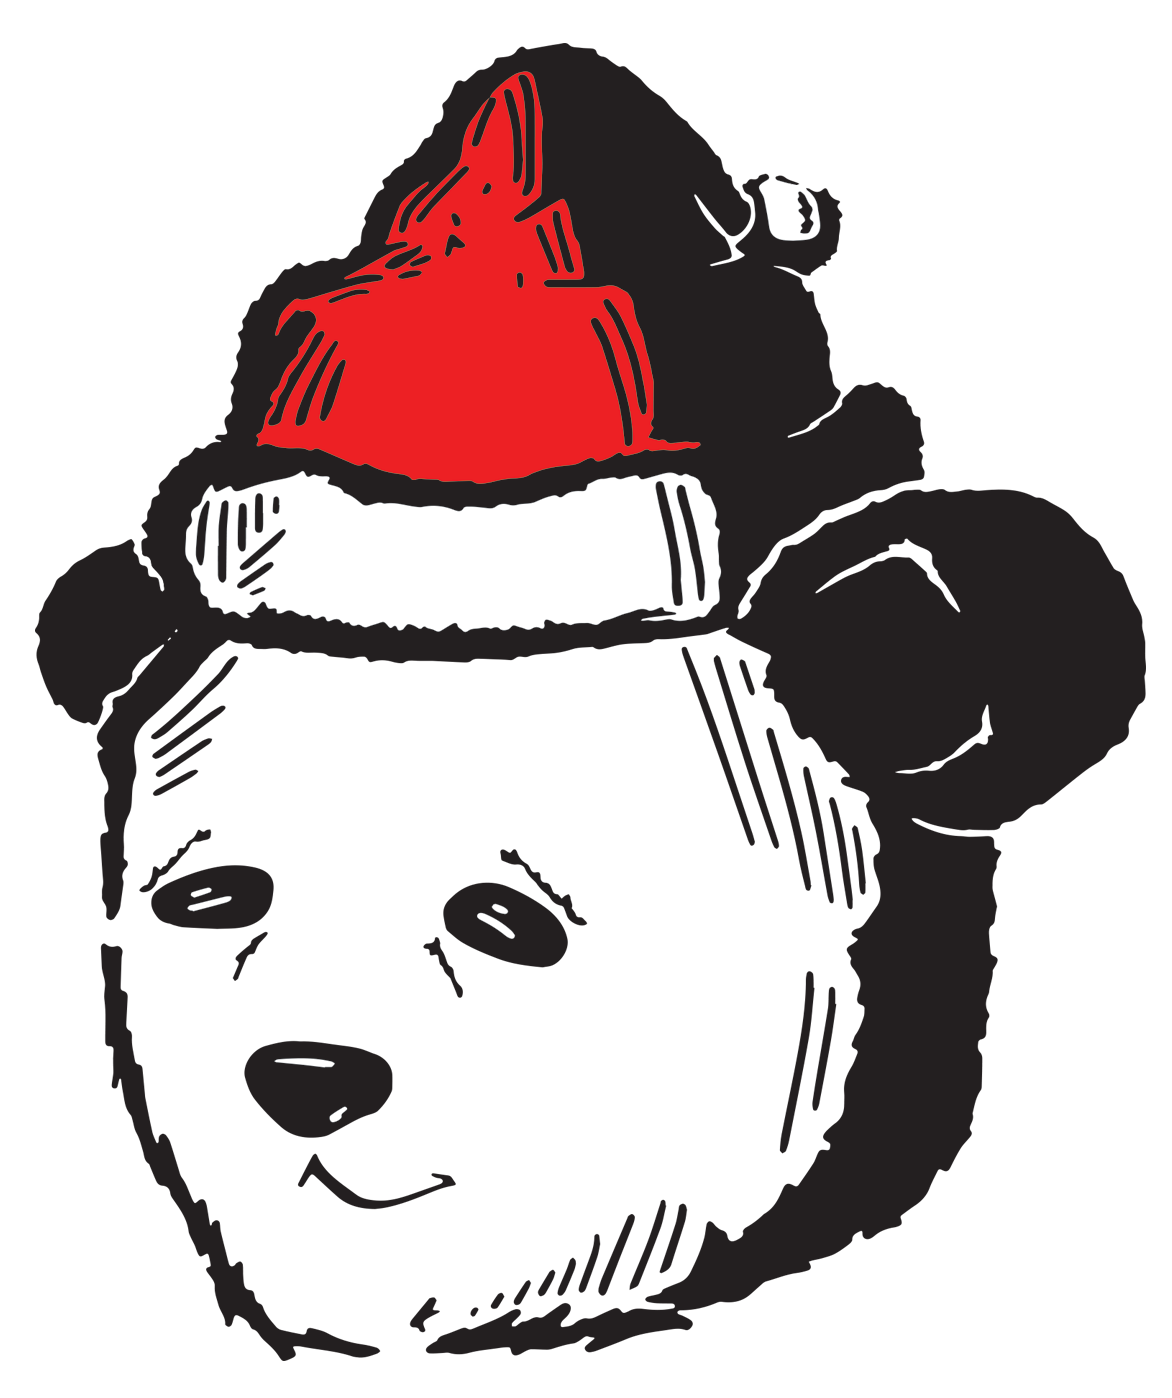 Polar is his name Pollar bear is the image, with a red santa hat 